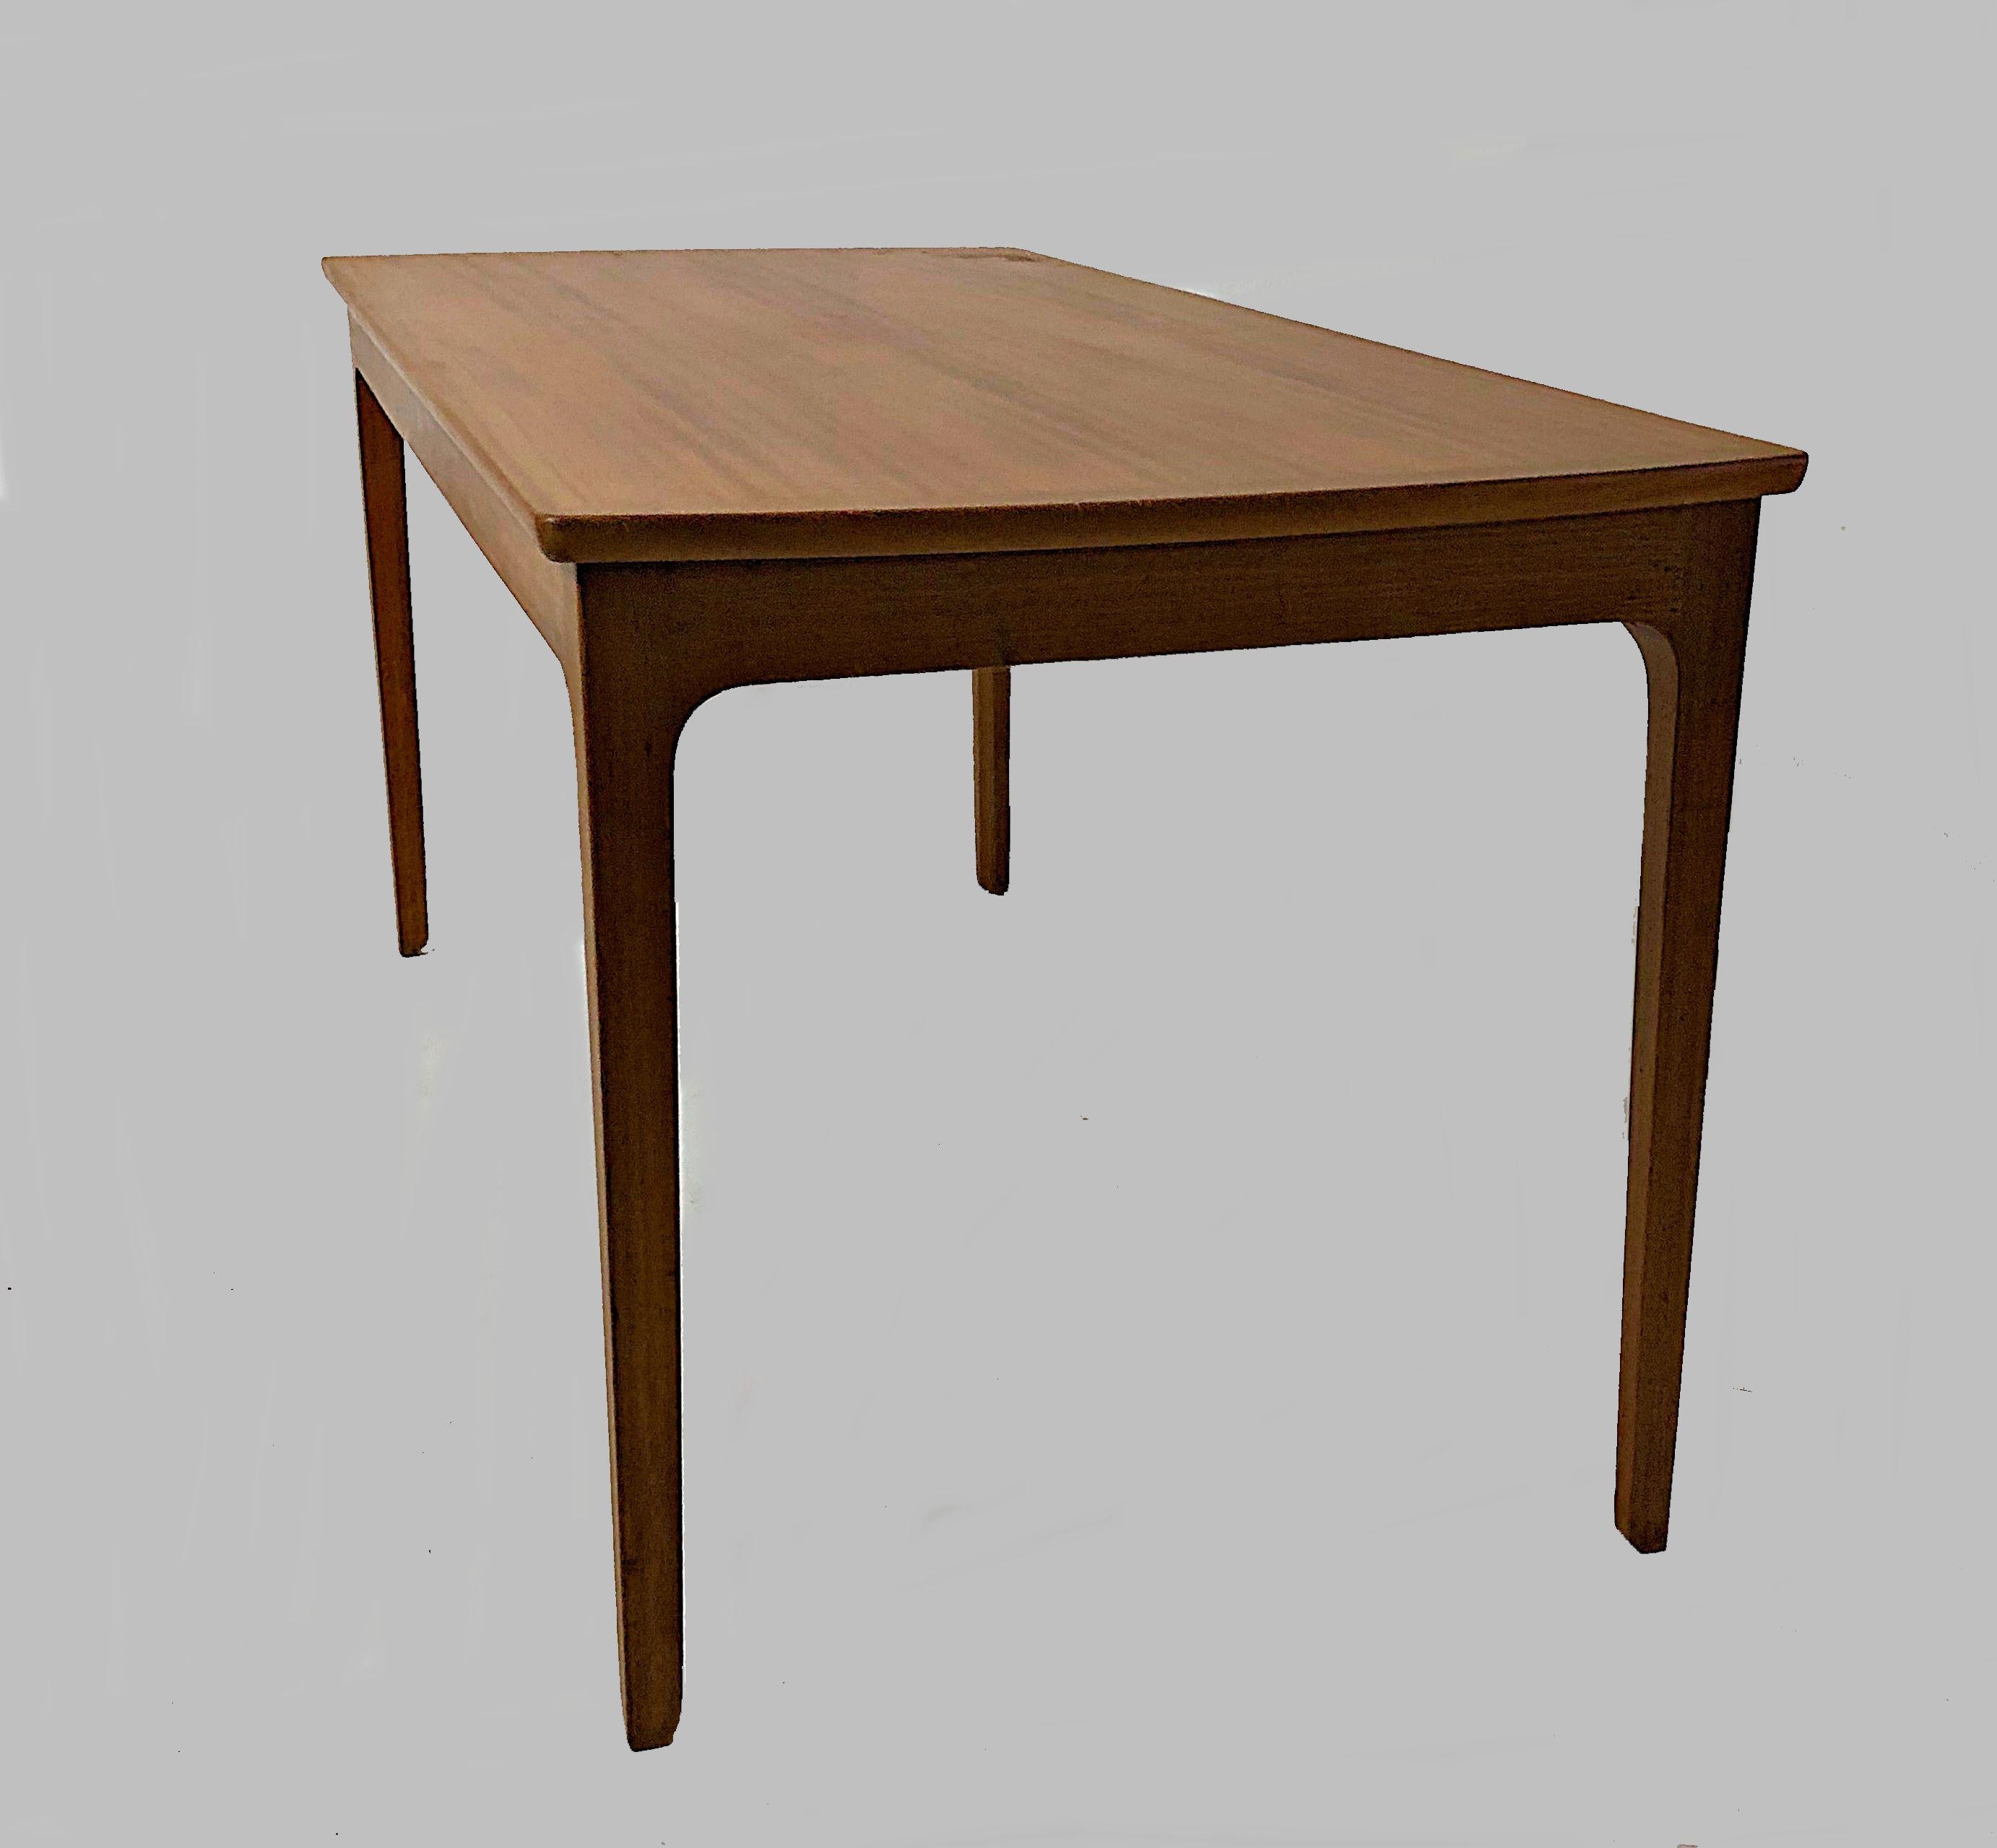 Danish 1960s Mahogany Coffee Table by Ole Wanscher for A.J. Iversen